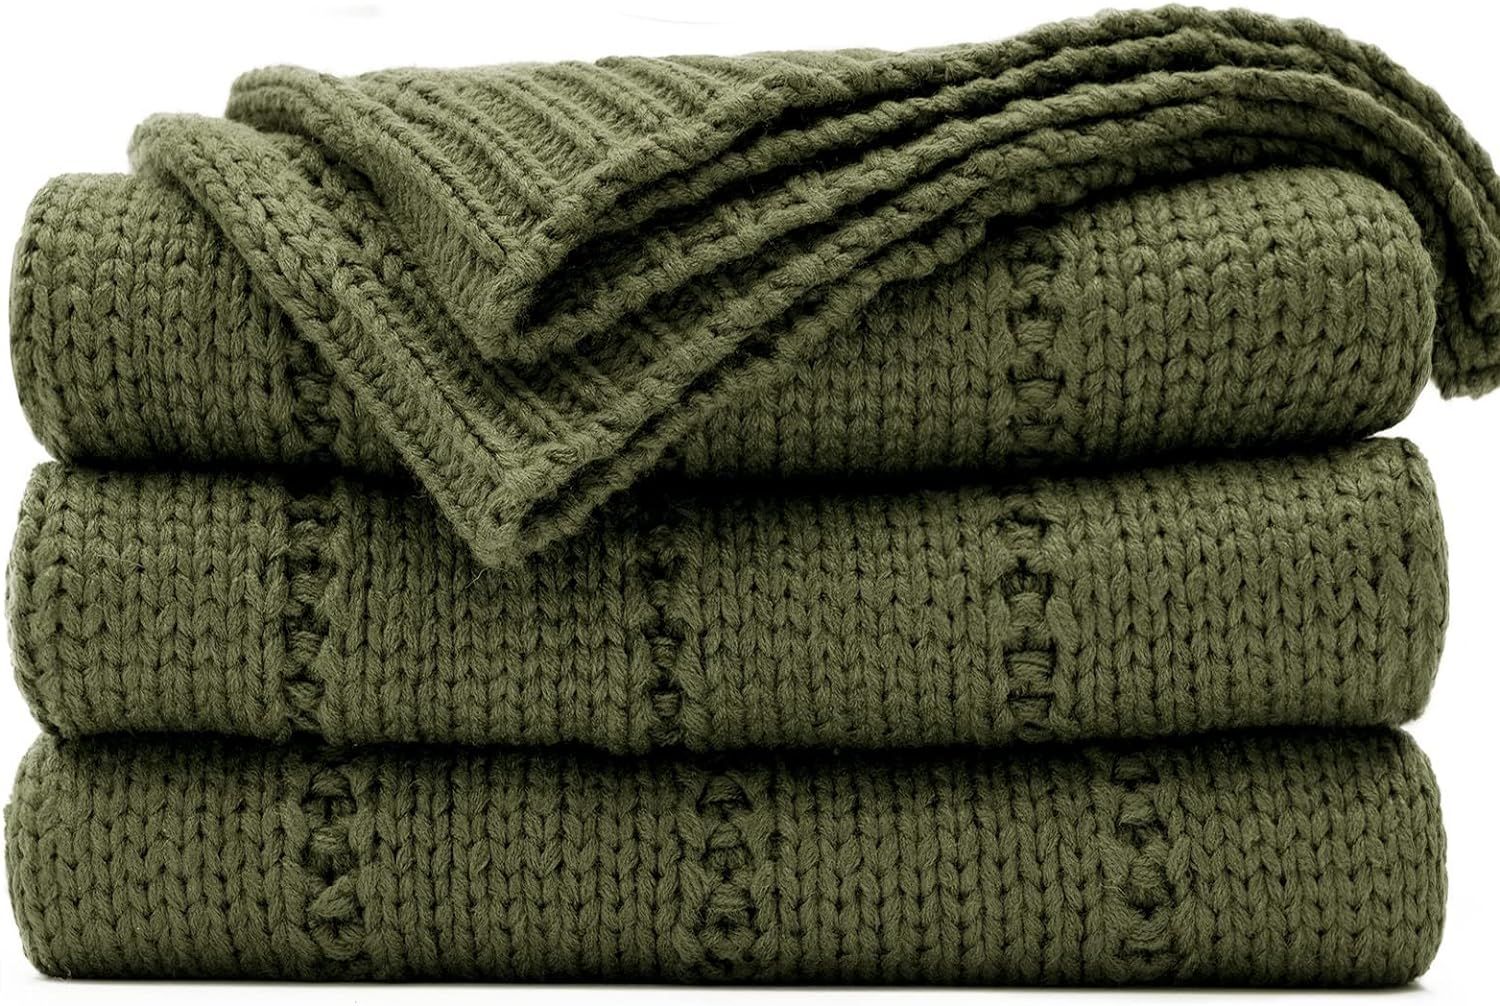 RECYCO Cable Knit Moss Green Throw Blanket for Couch, Super Soft Warm Cozy Decorative Knitted Thr... | Amazon (US)